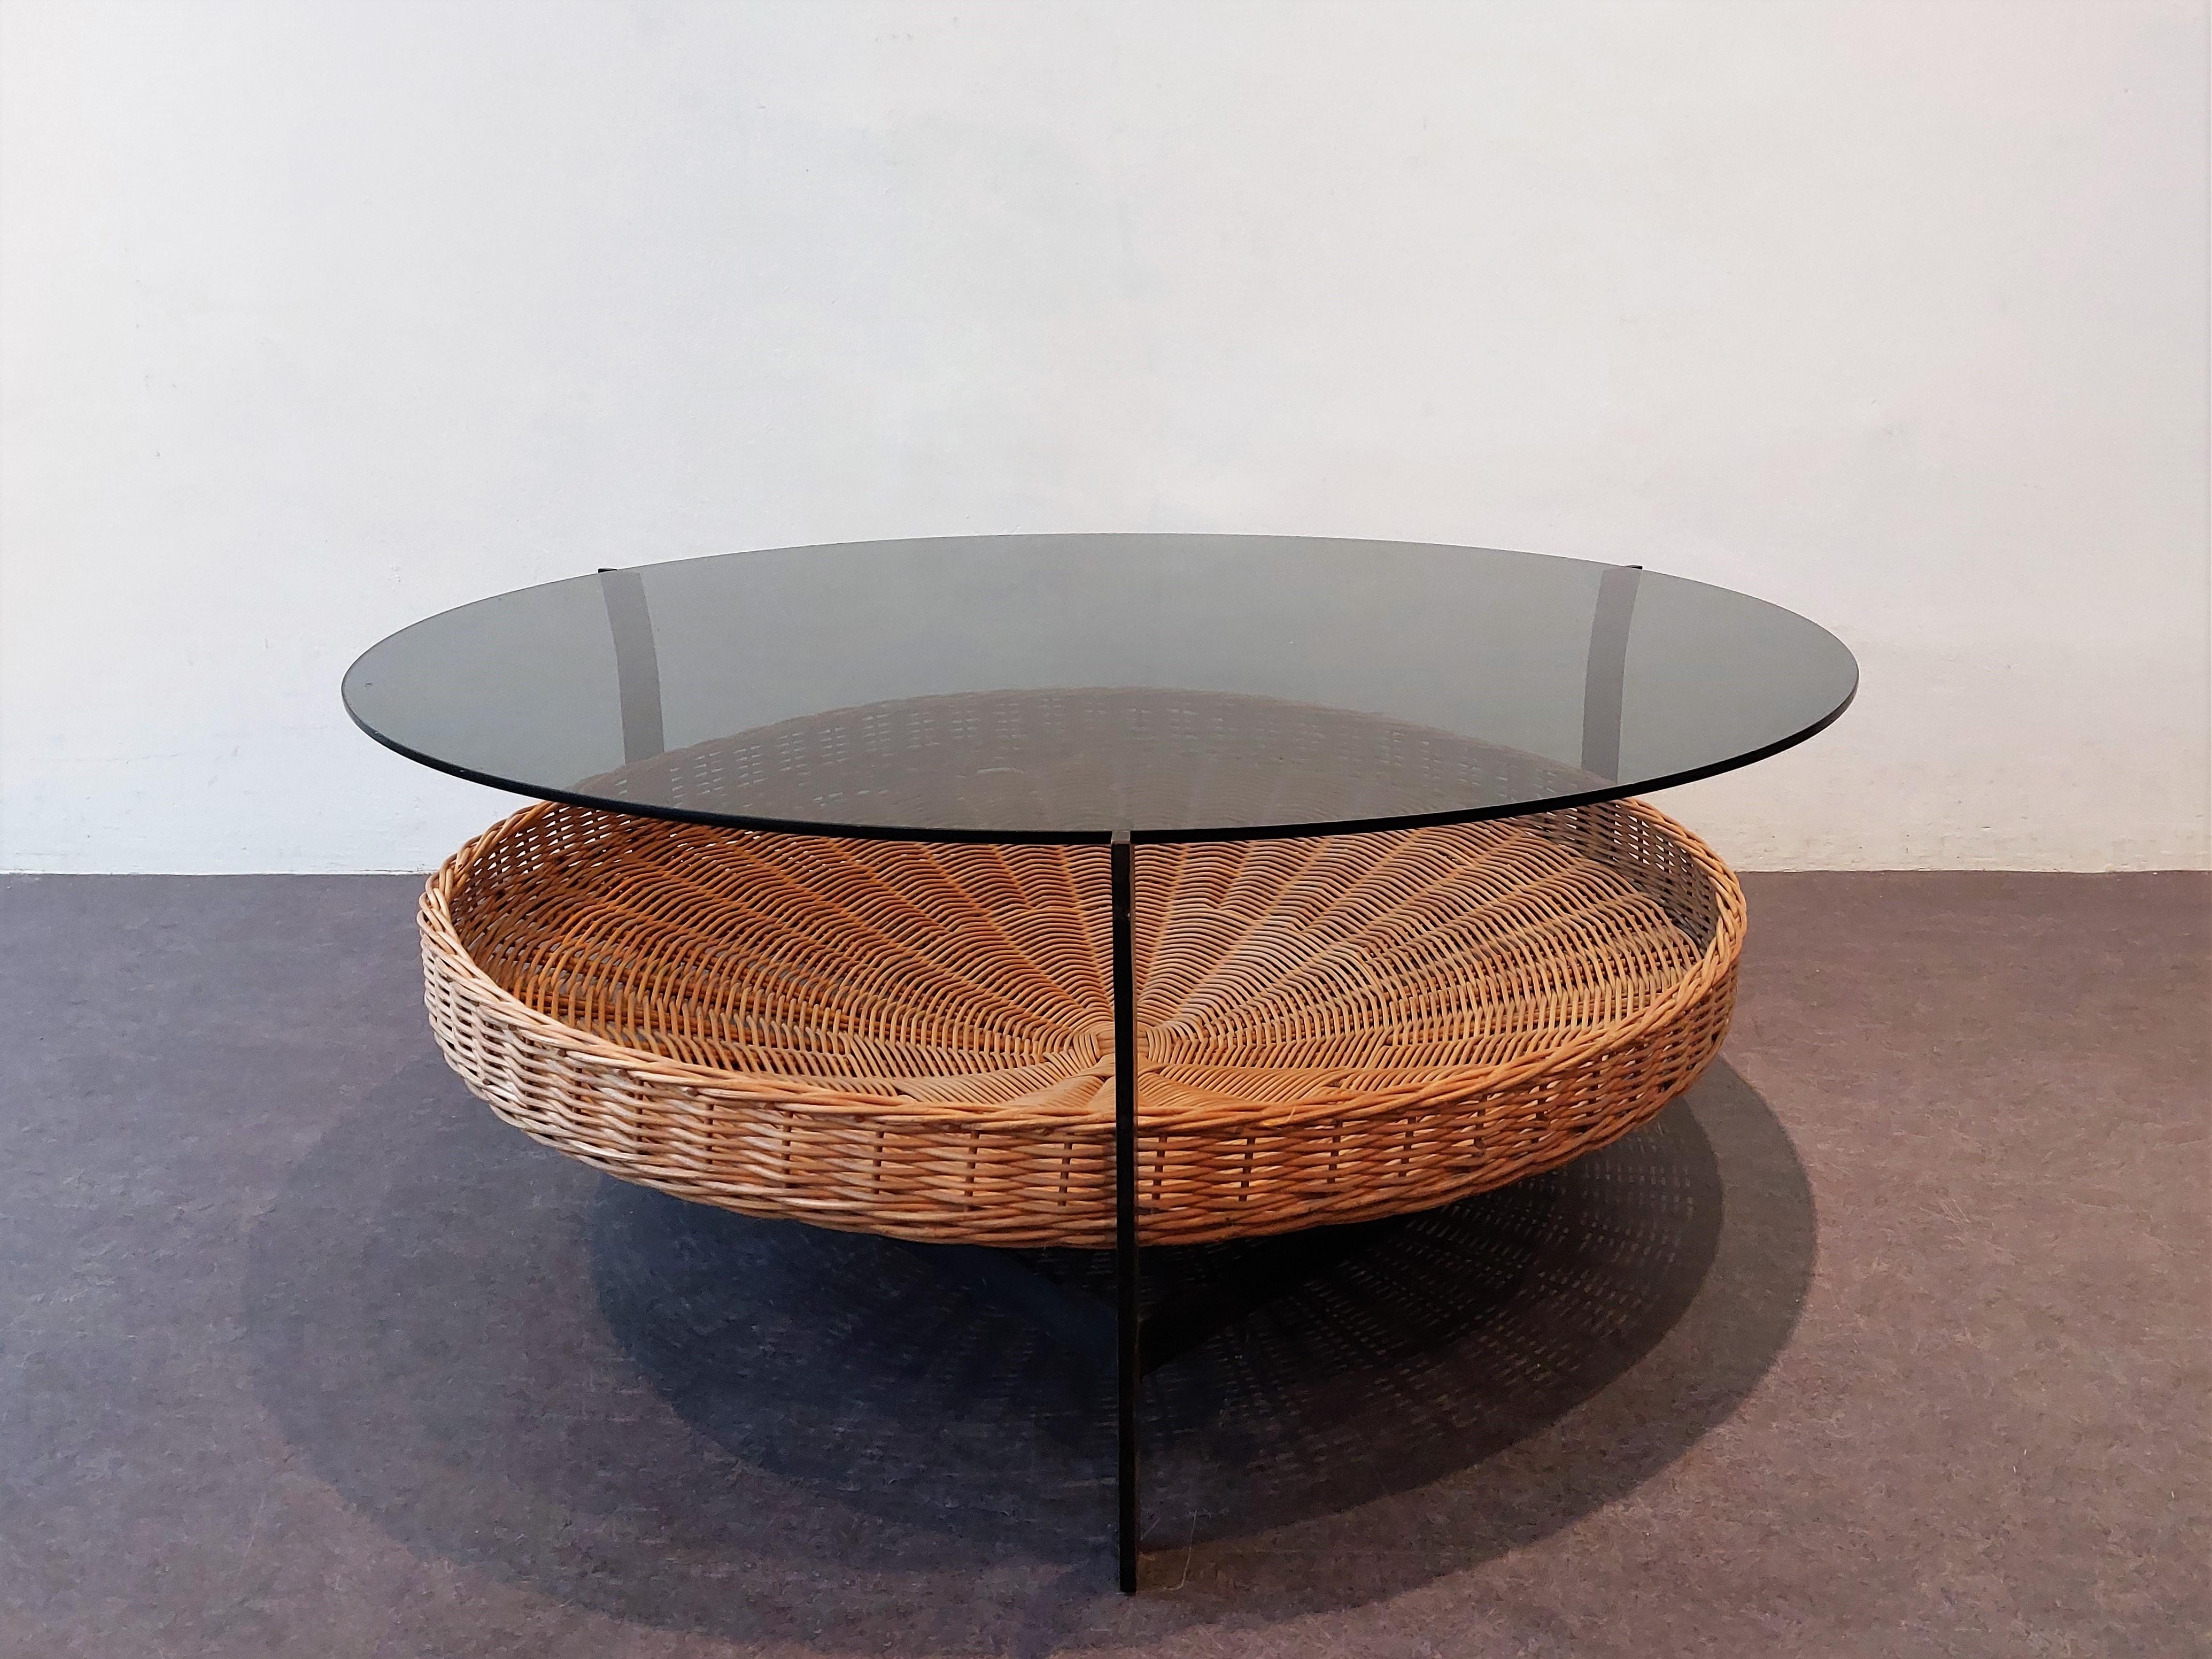 The design of this table shows similarities to the designs and productions of Janni van Pelt, Martin Visser and/or Rohé. It does have scratches to the darker smoked glass top from use. The glass has two little spots that show that this is a high